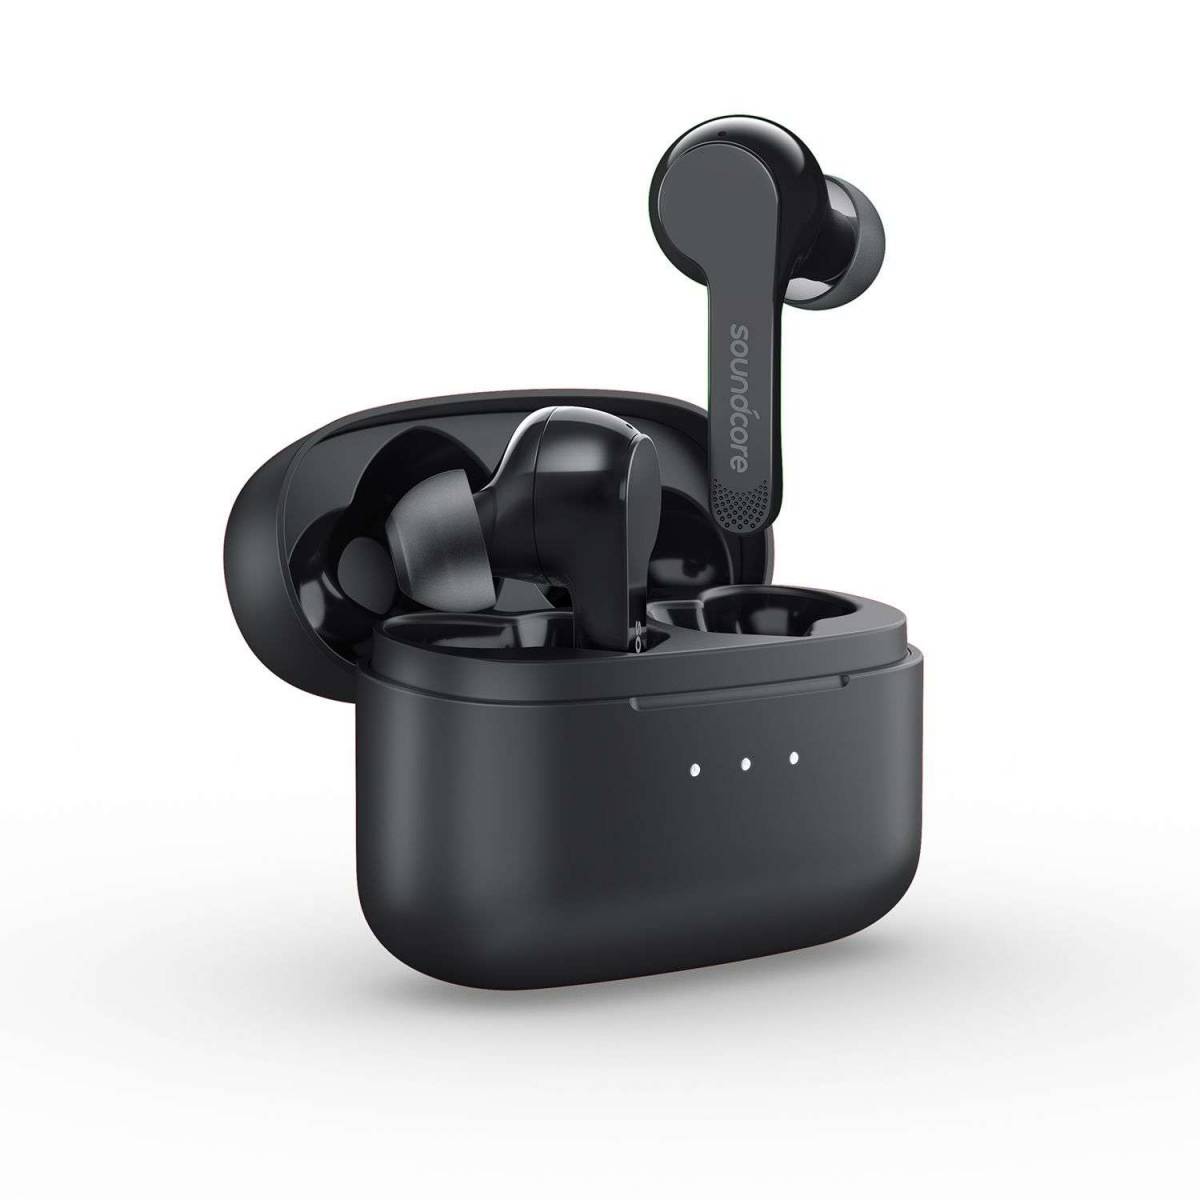 IPhone-Compatible Headsets: Choosing The Best Bluetooth Headset For IPhone